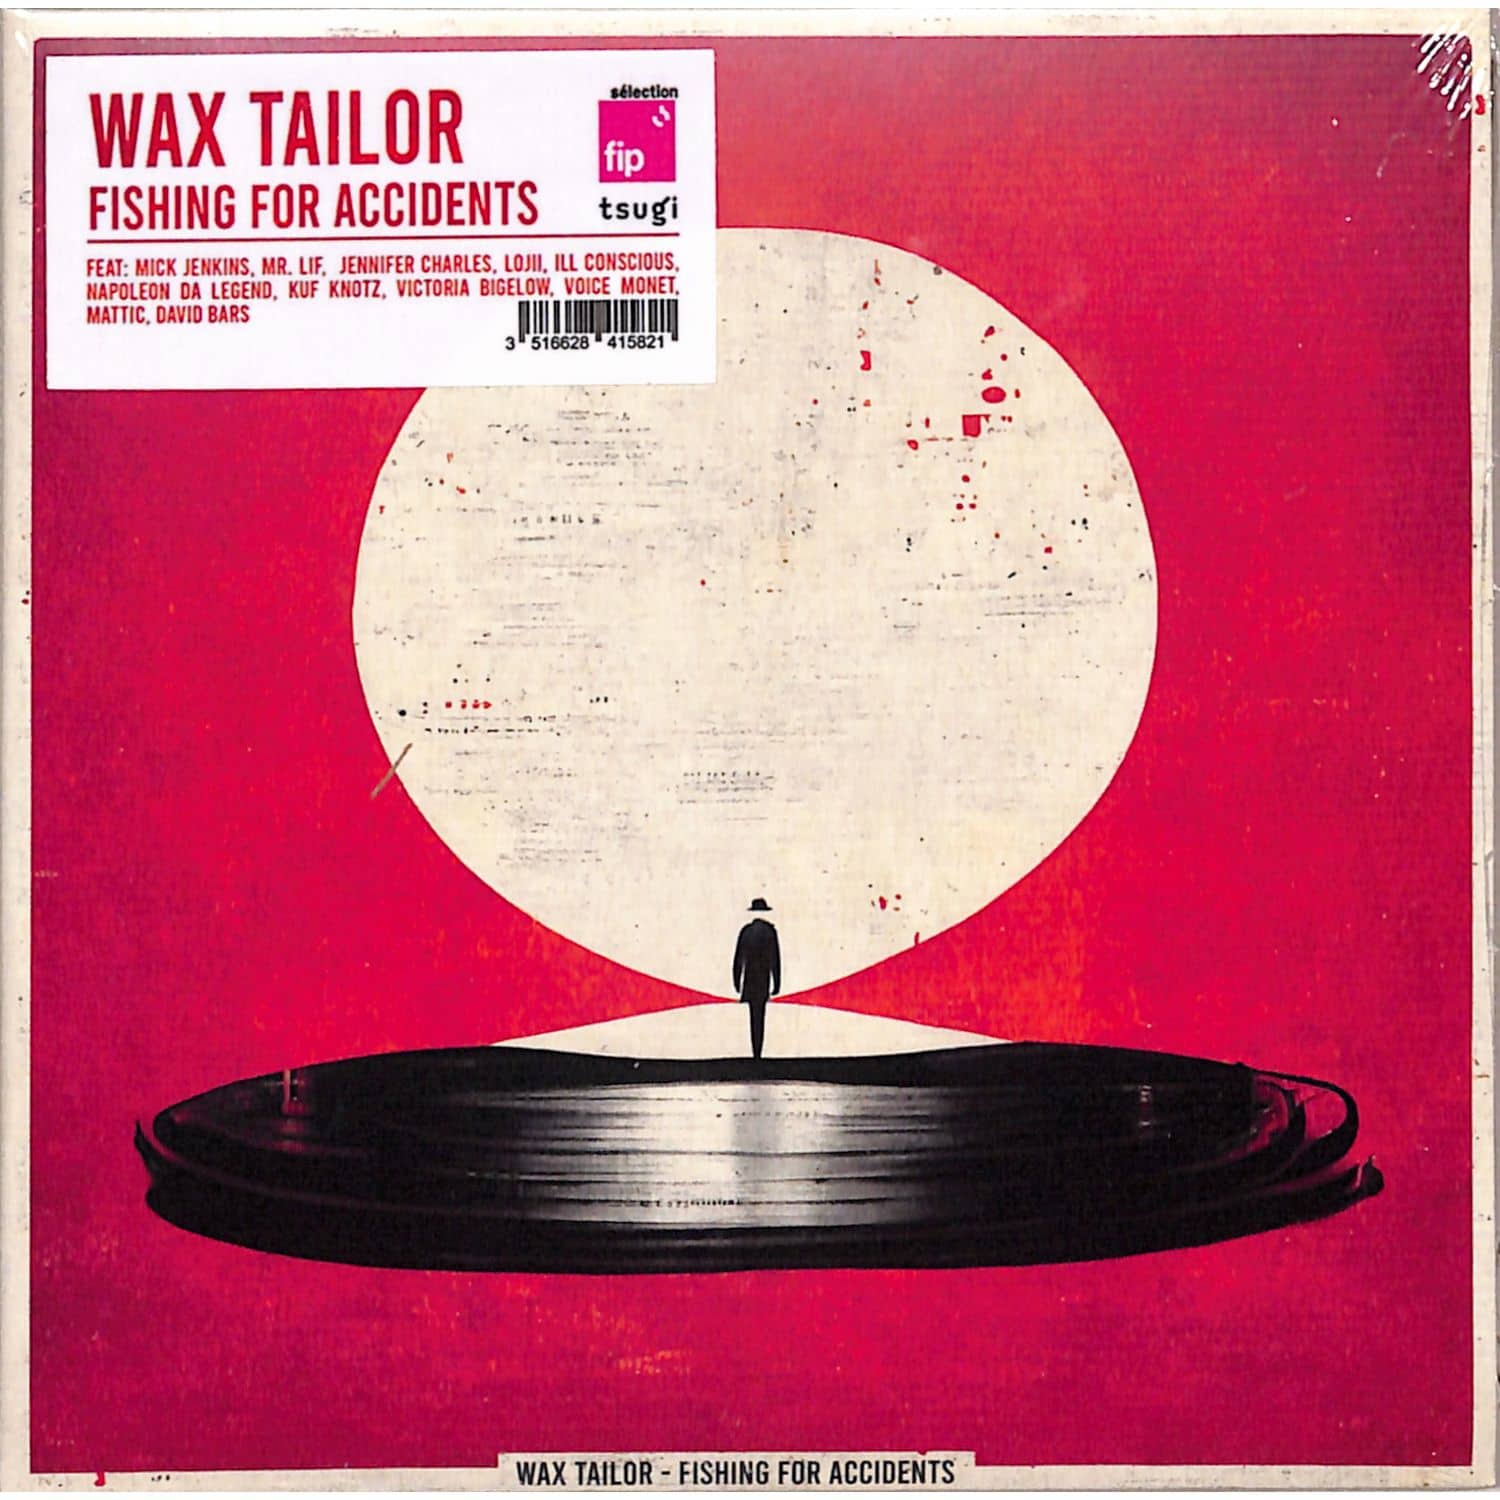 Wax Tailor - FISHING FOR ACCIDENTS 